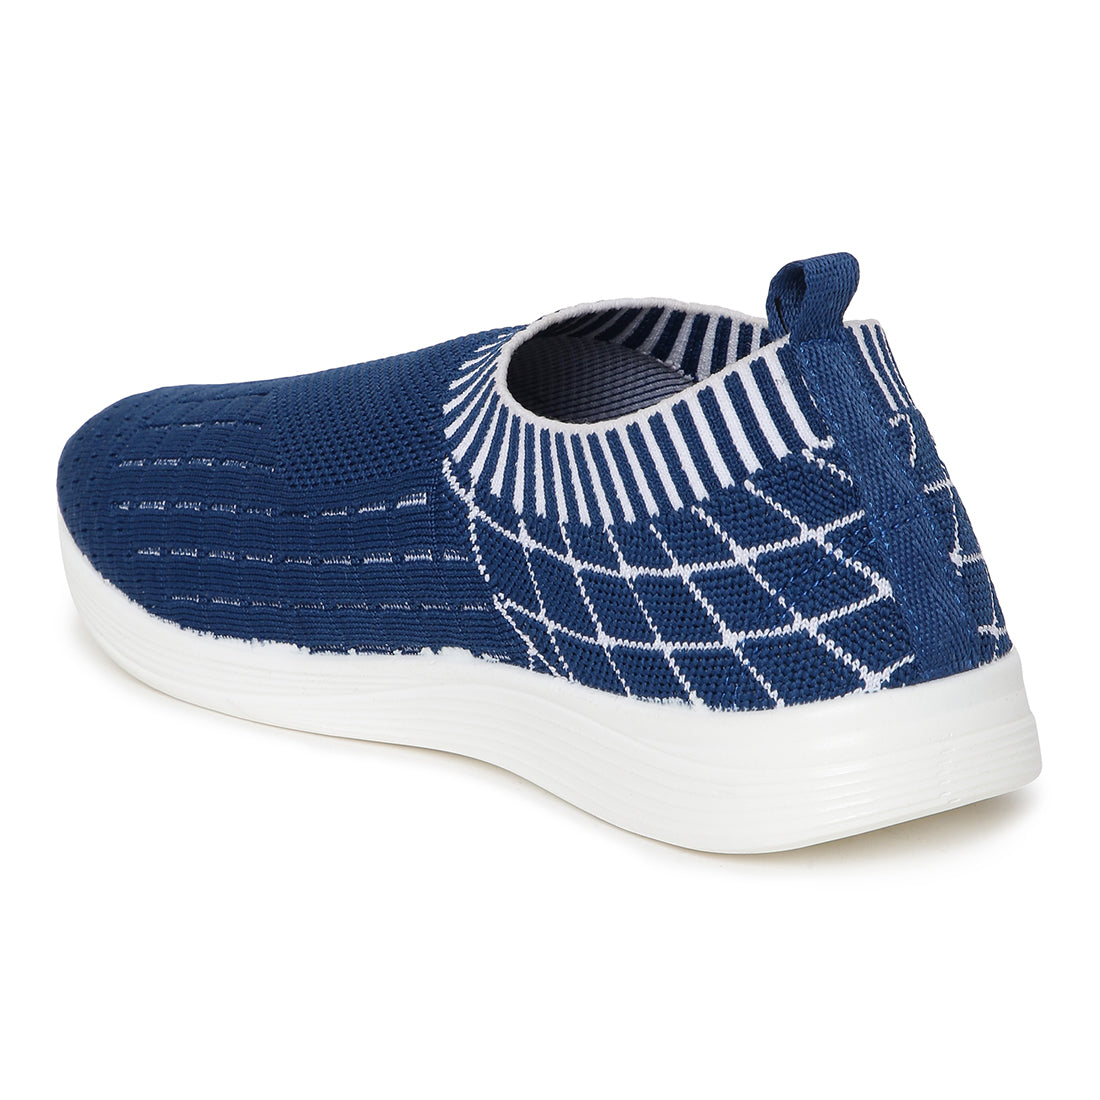 Stimulus PUSTL5021AP Blue Stylish Daily Comfortable Casual Shoes For Women